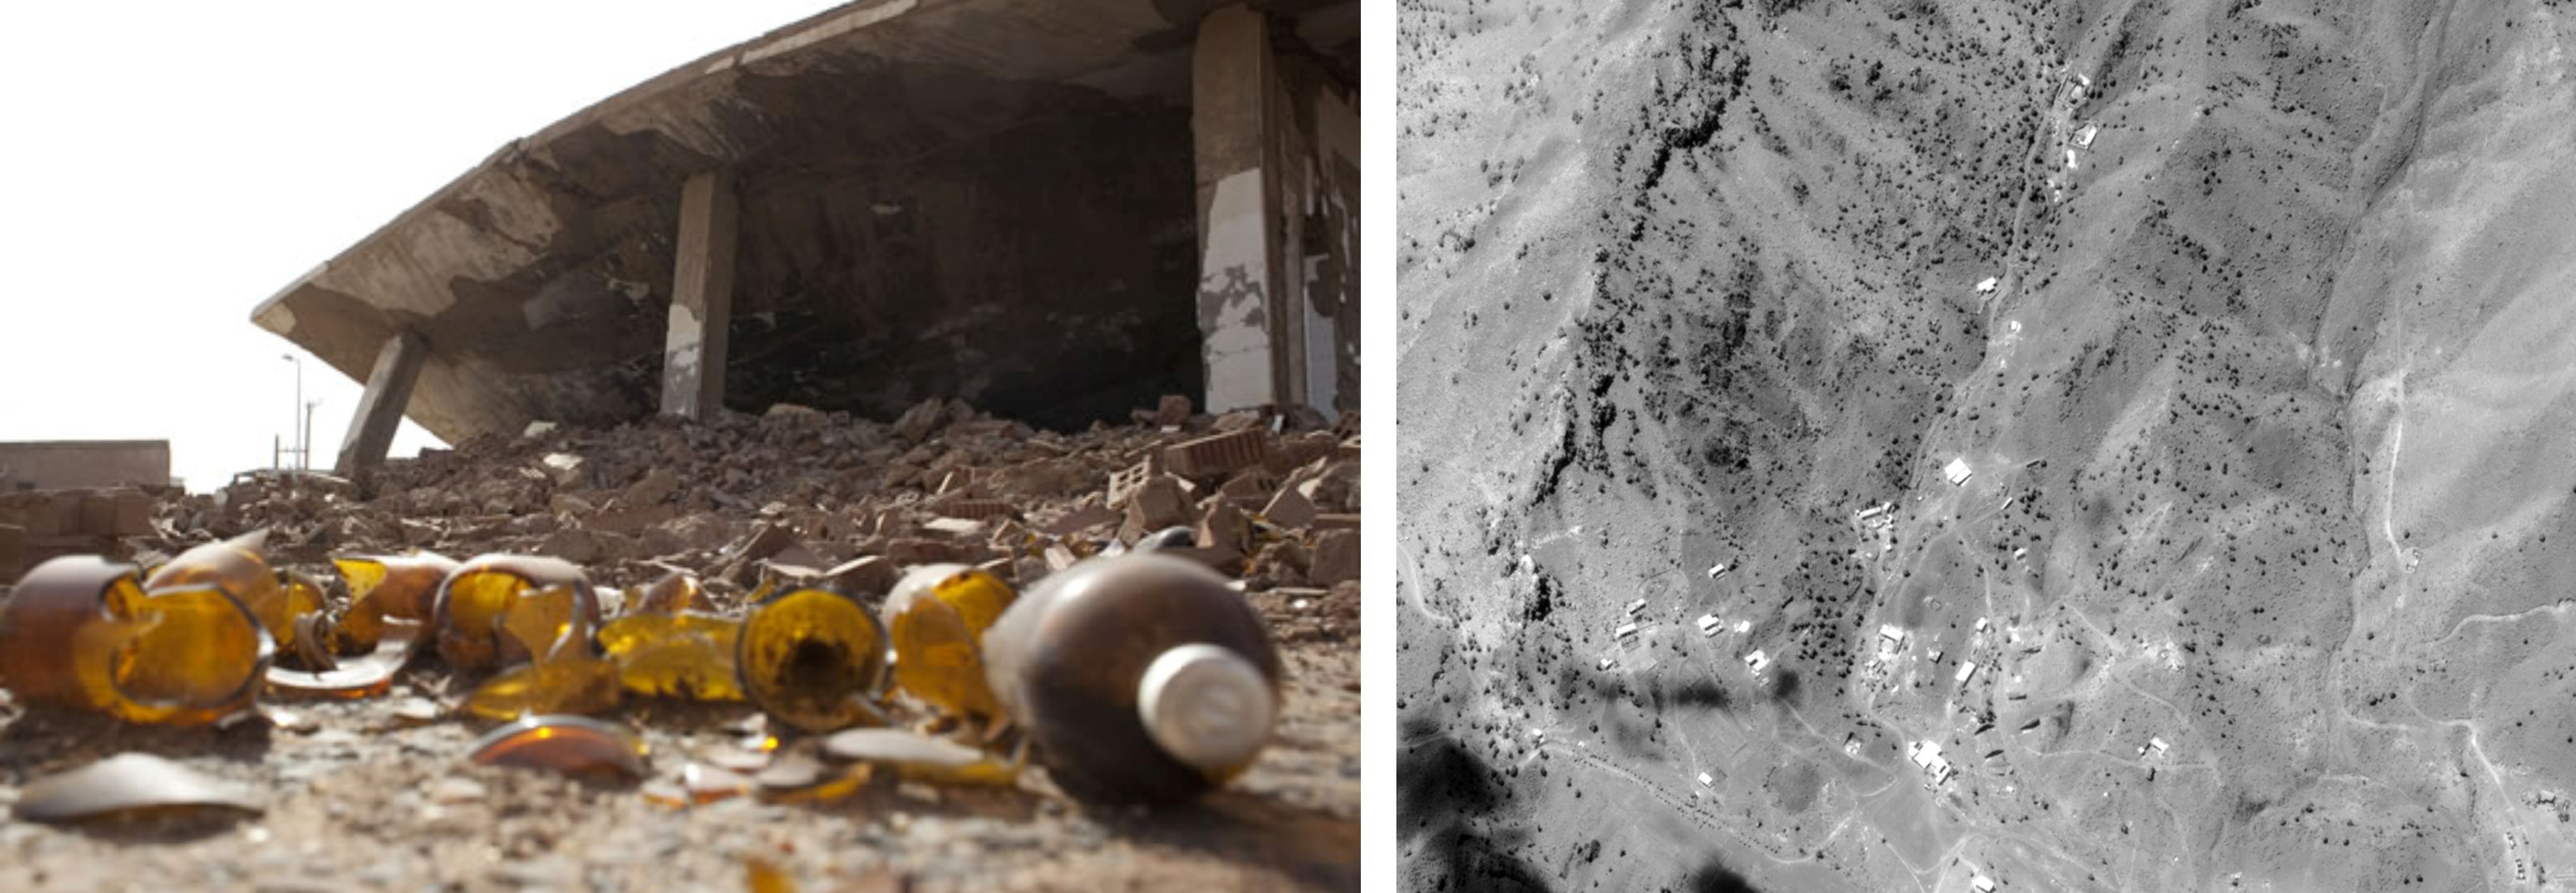 On the left, the Al-Shifa pharmaceutical factory after the missile attack. On the right, a satellite image of the Zhawar Kili Al-Badr training camp complex.